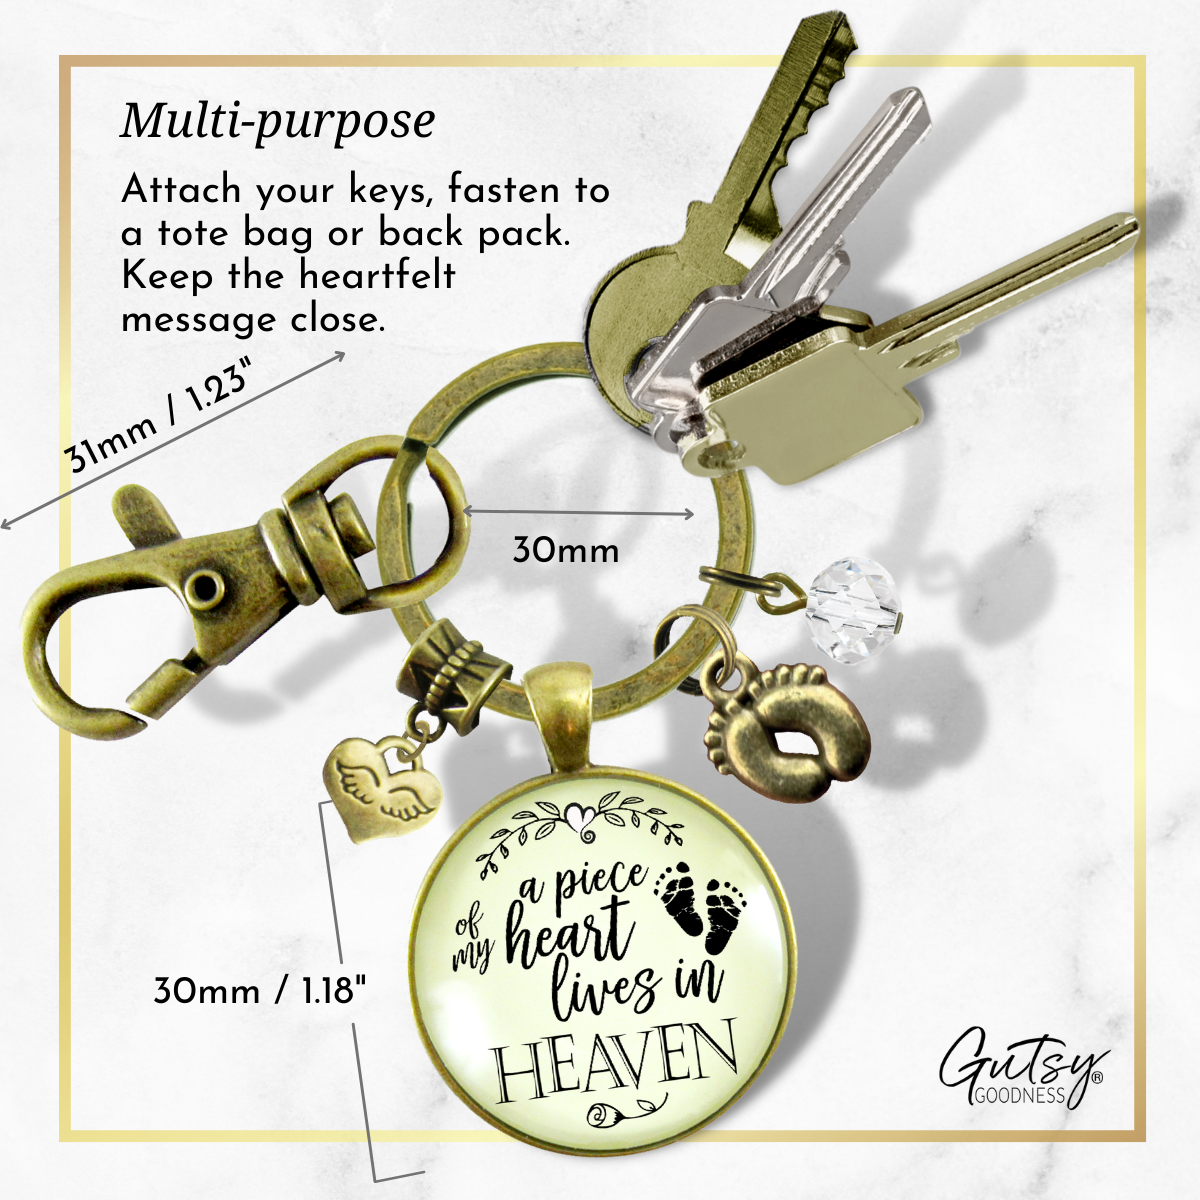 Miscarriage Baby Loss Keychain Piece of Heart Heaven Memory Baby Feet Jewelry - Gutsy Goodness Handmade Jewelry;Miscarriage Baby Loss Keychain Piece Of Heart Heaven Memory Baby Feet Jewelry - Gutsy Goodness Handmade Jewelry Gifts